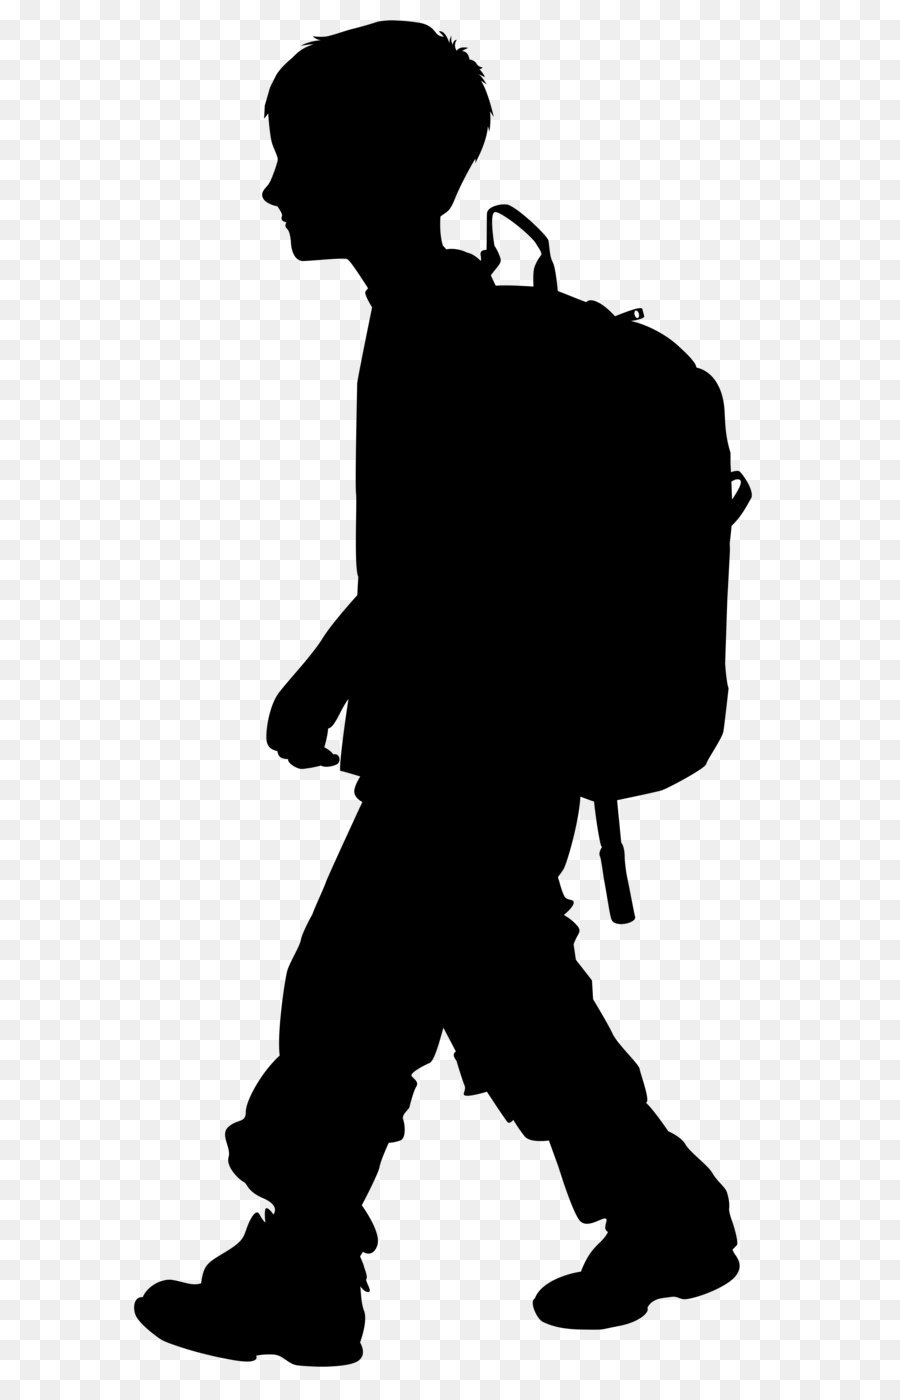 Silhouette Scalable Vector Graphics Clip art - Boy with Backpack Silhouette PNG Clip Art Image png download - 3748*8000 - Free Transparent Silhouette png Download.